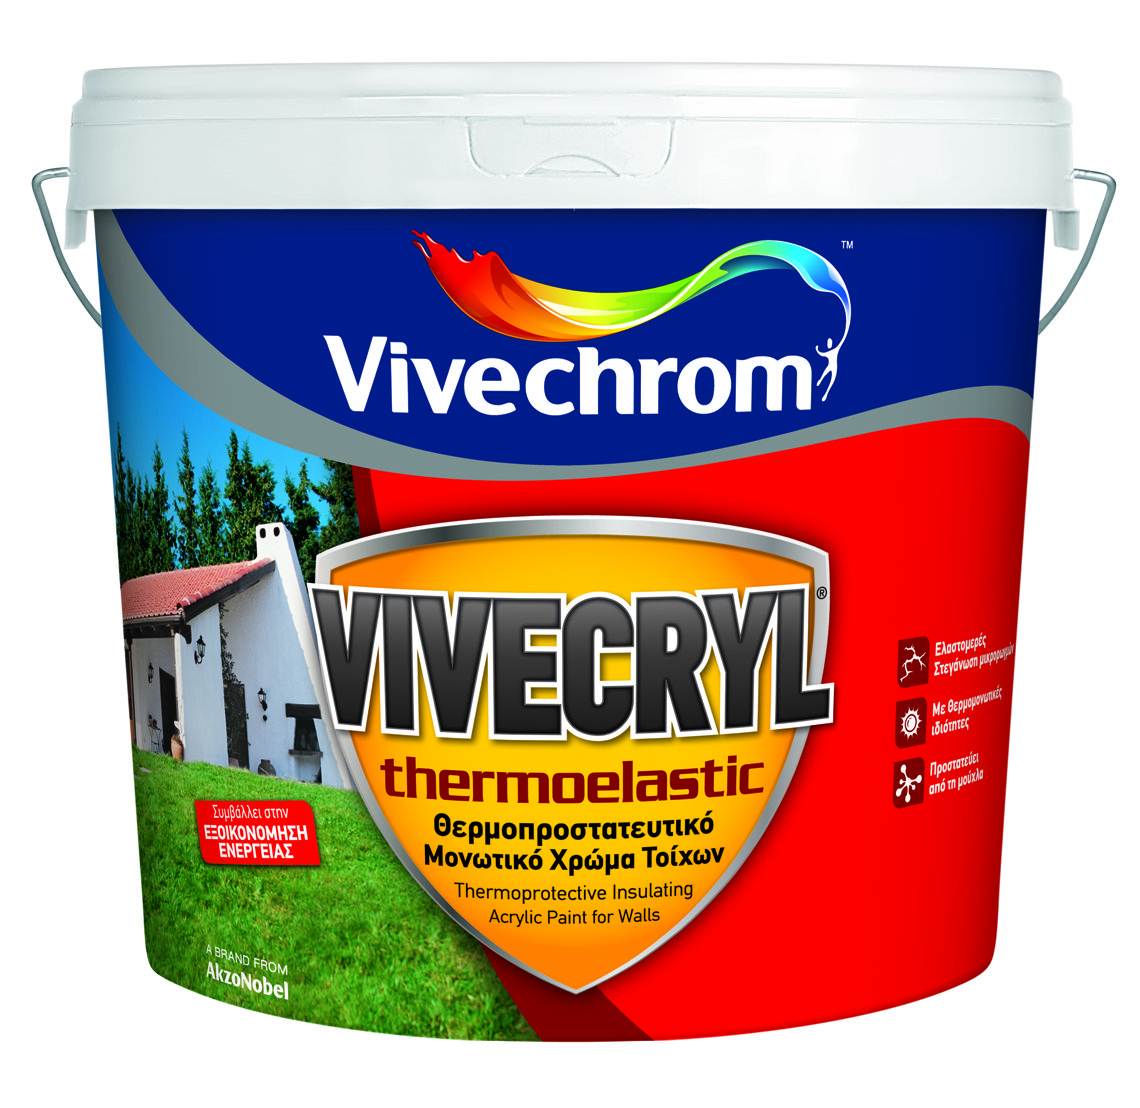 Vivechrom Vivecryl Thermoelastic Matt Finish Mixing Base D 10L